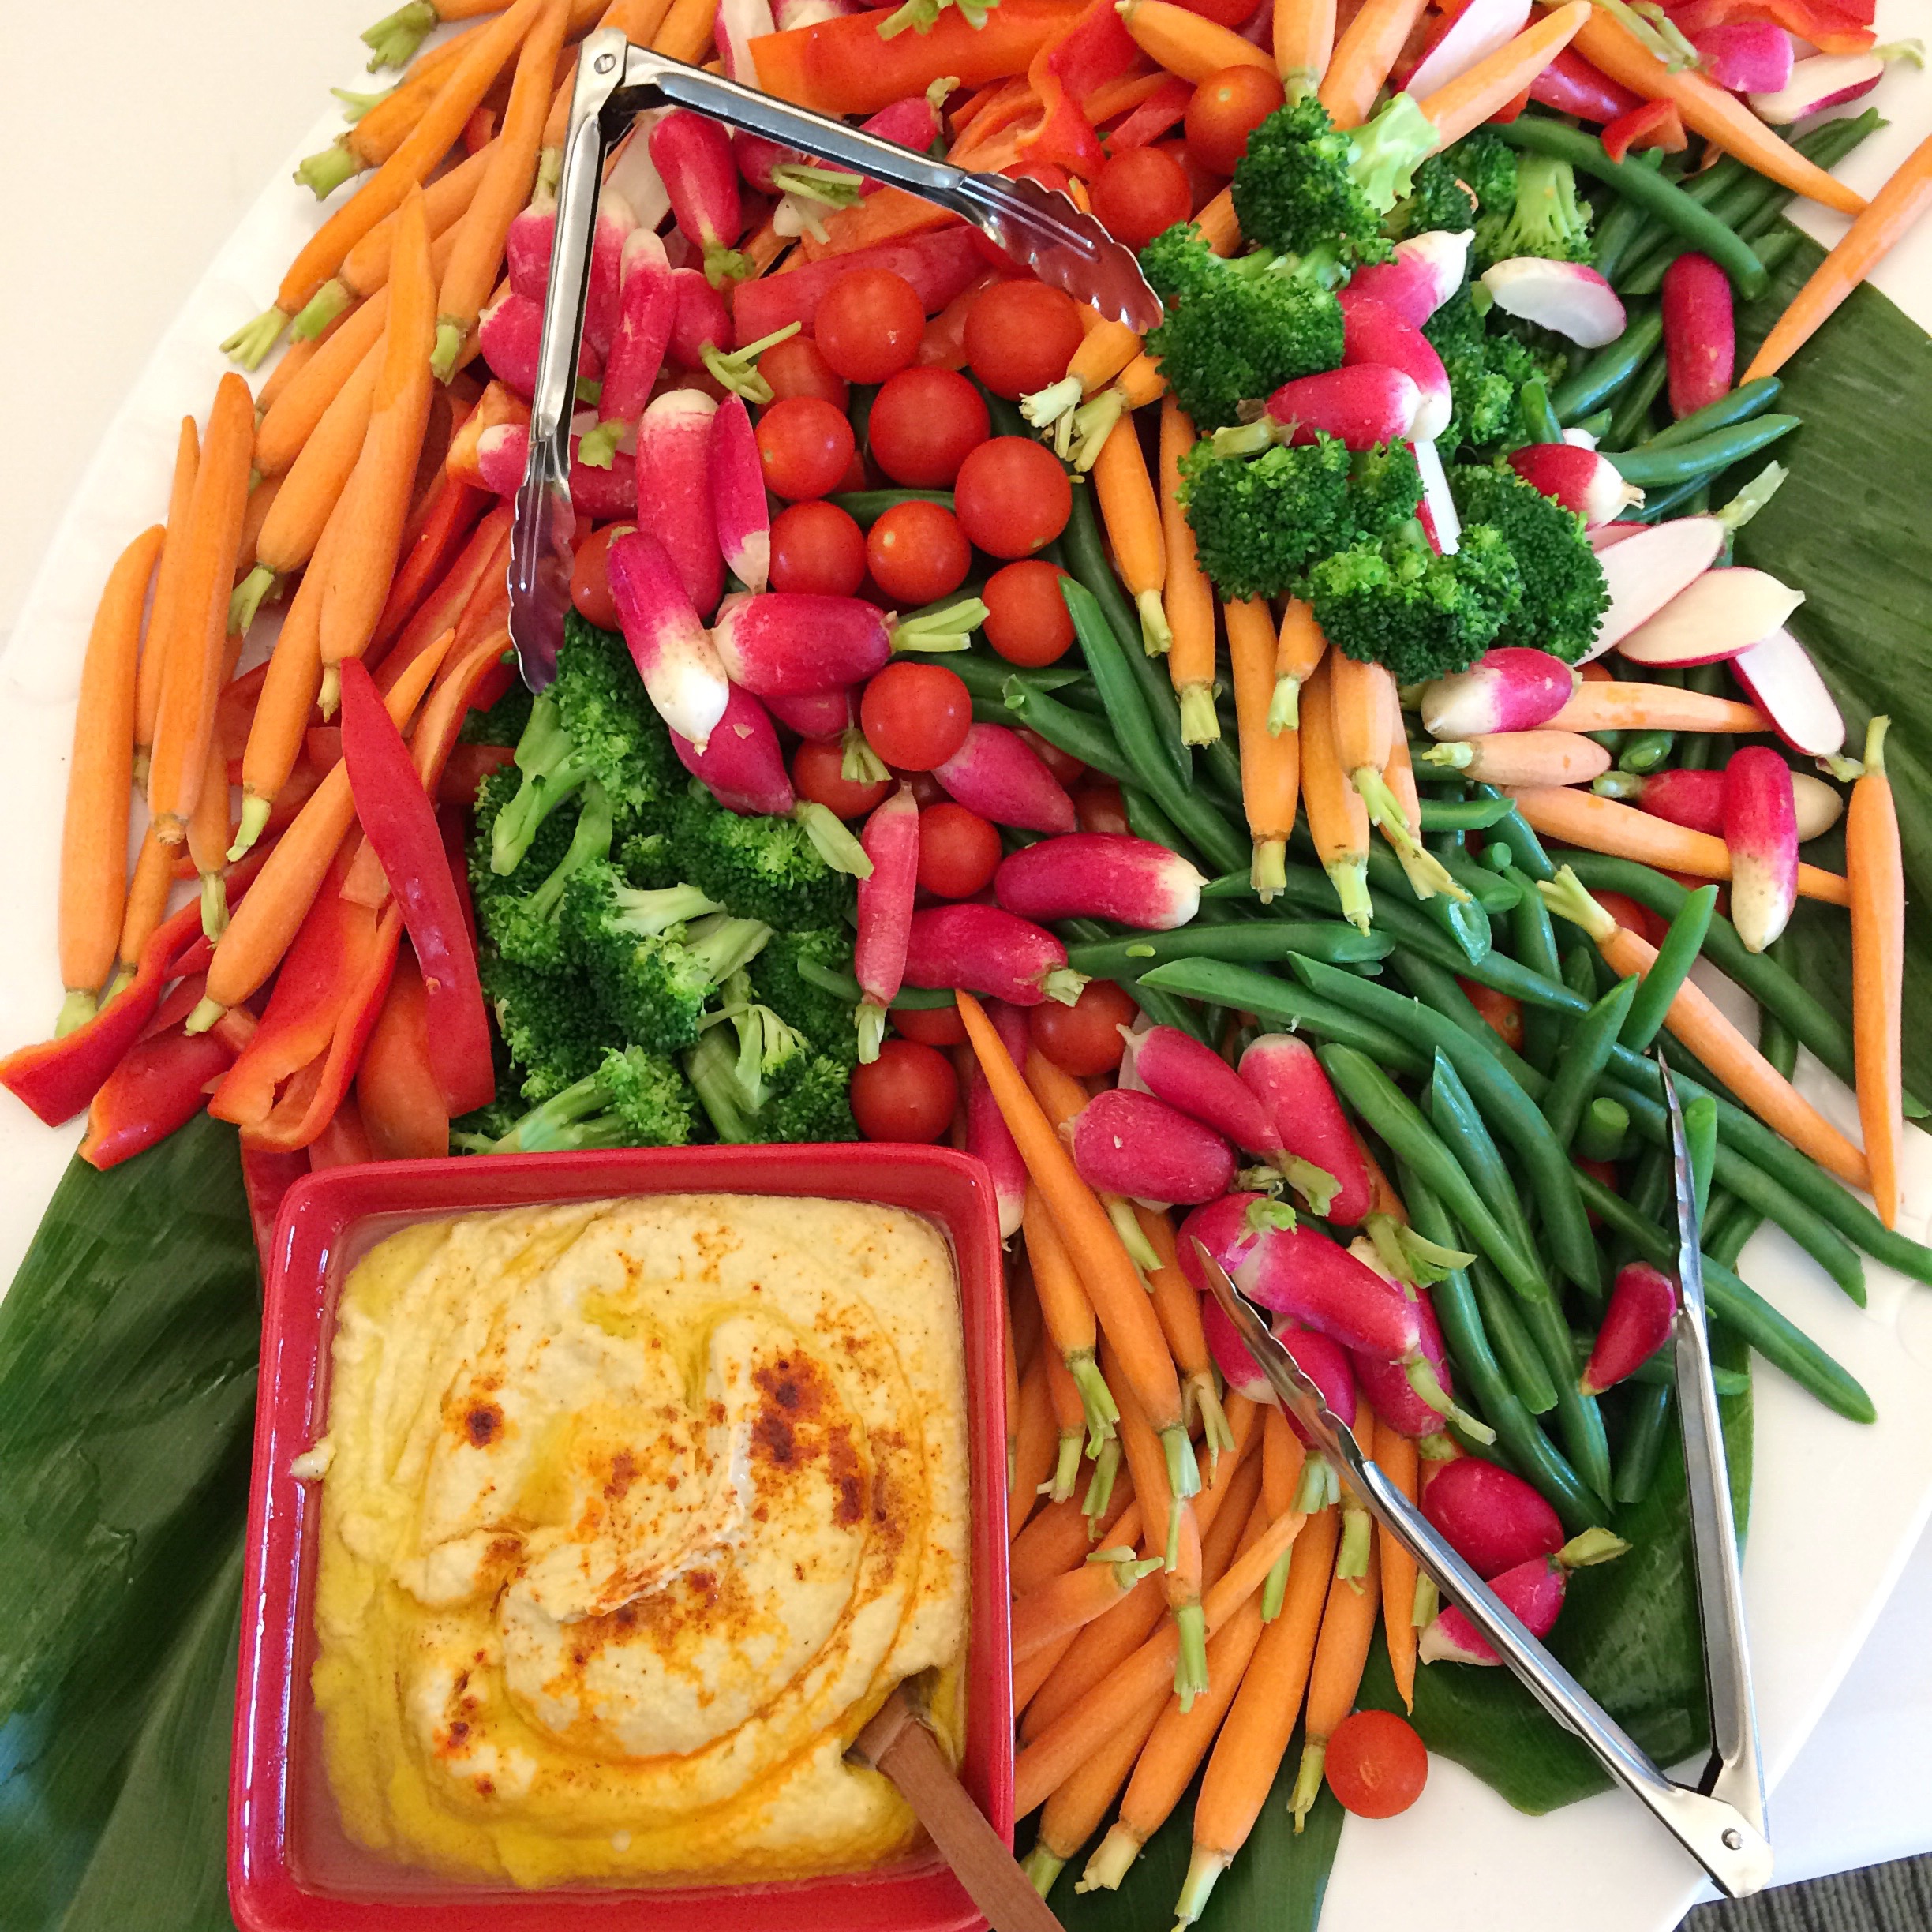 Vegetables with Hummus